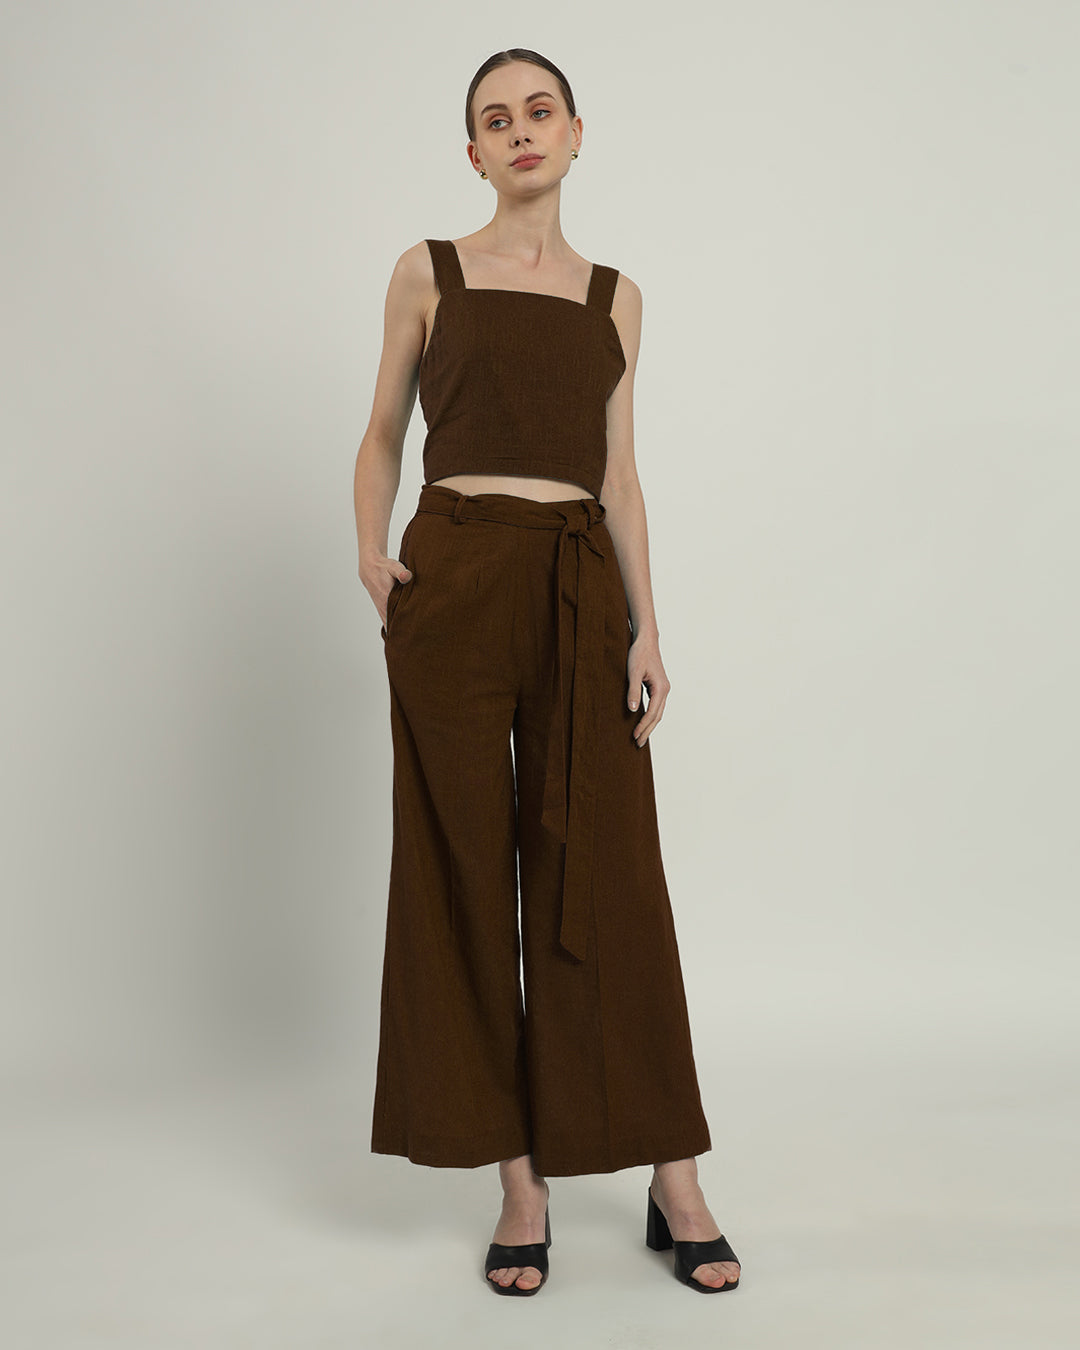 Nutshell Sleek Square Crop Top (Without Bottoms)